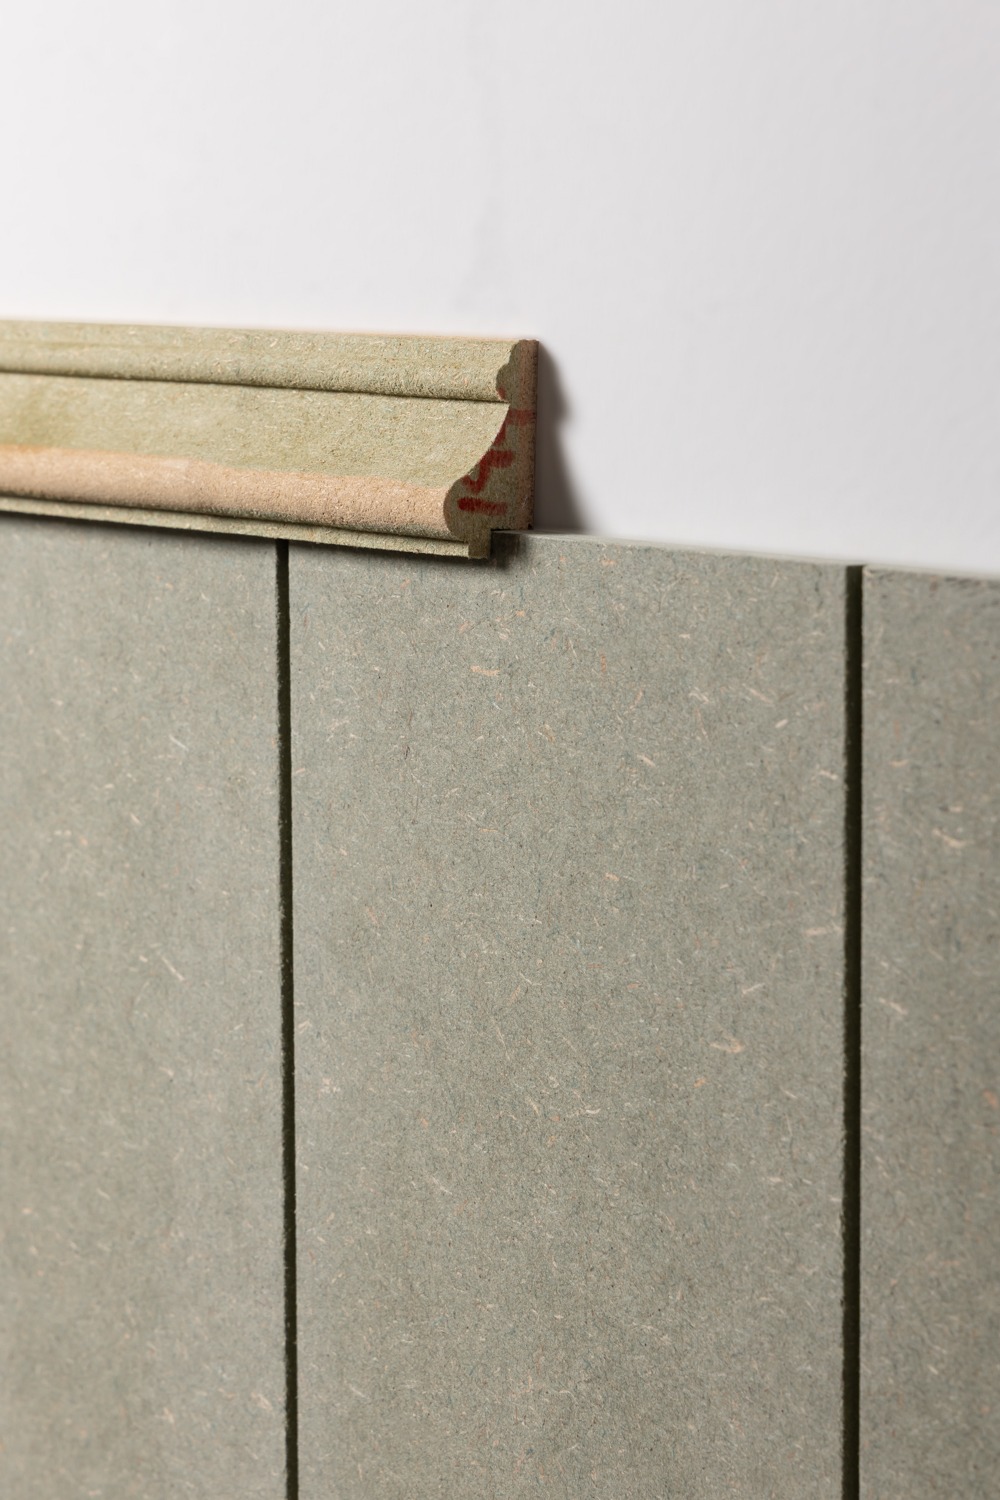 image to show an unprimed dado rail being used as a top trim for wall panels